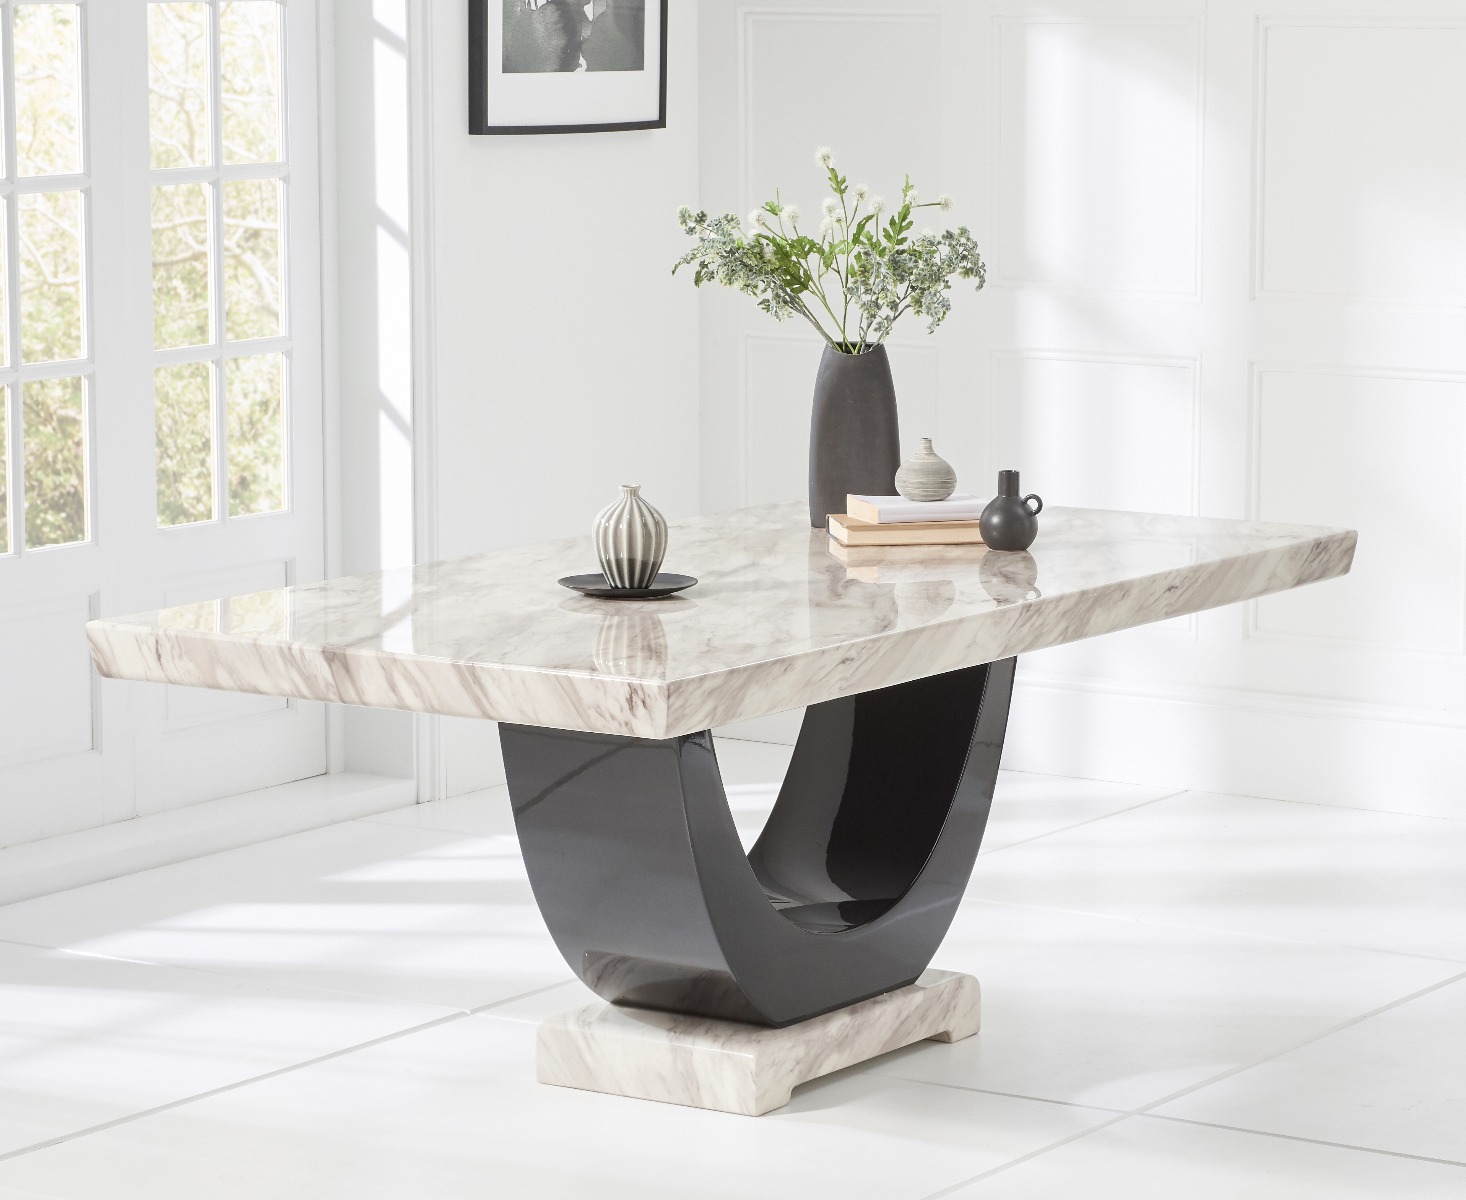 Photo 4 of Novara 200cm cream and black pedestal marble dining table with 6 cream sophia chairs